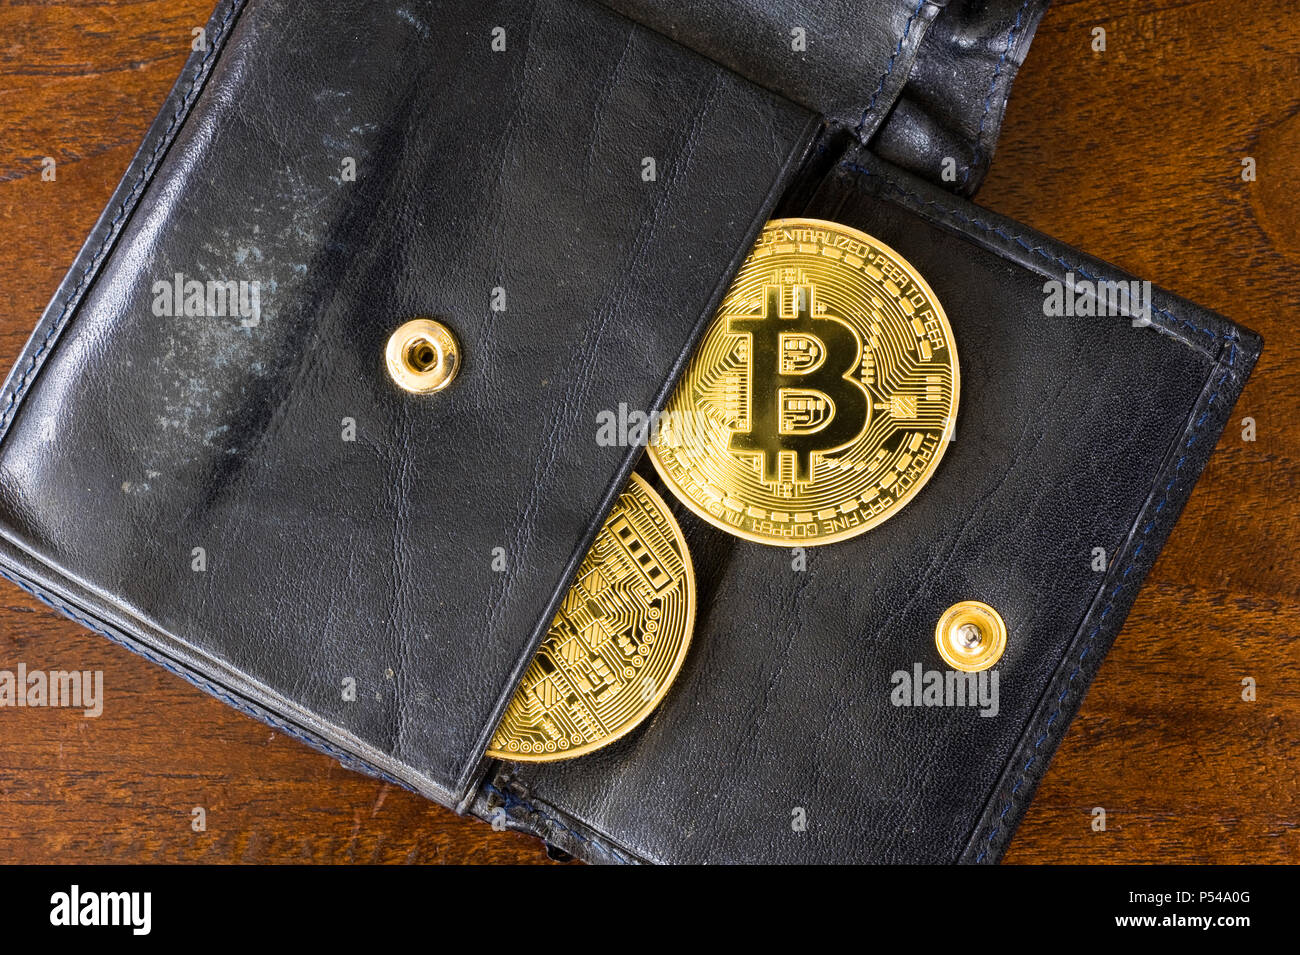 Two bitcoins in a wallet Stock Photo